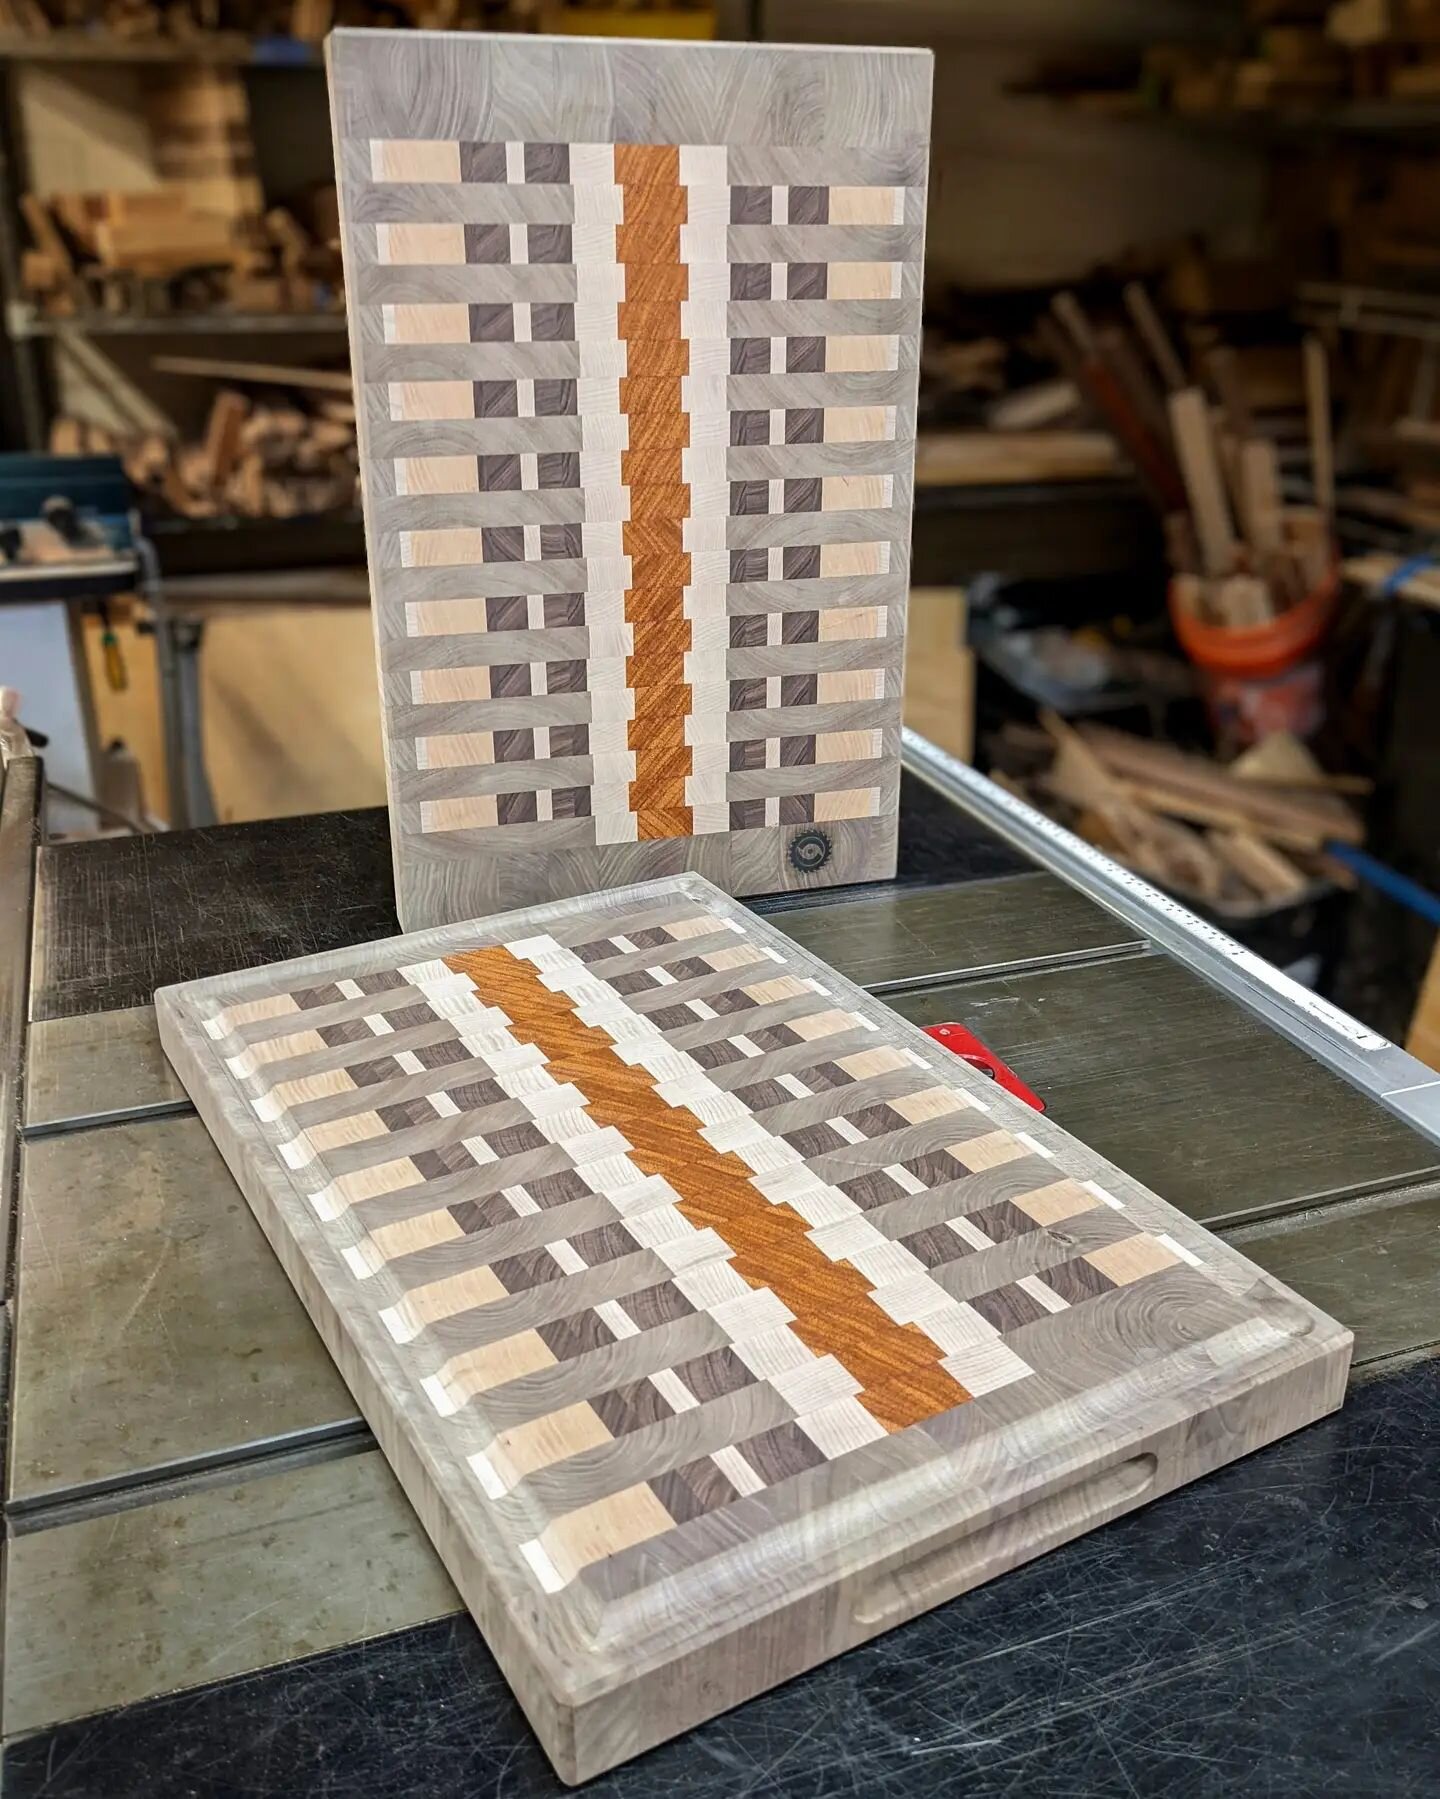 The two &quot;Claiborne&quot; end grain boards all shaped and finish sanded to 320. The woods in these boards are Walnut, Maple, Cherry, Morado, and Padauk.